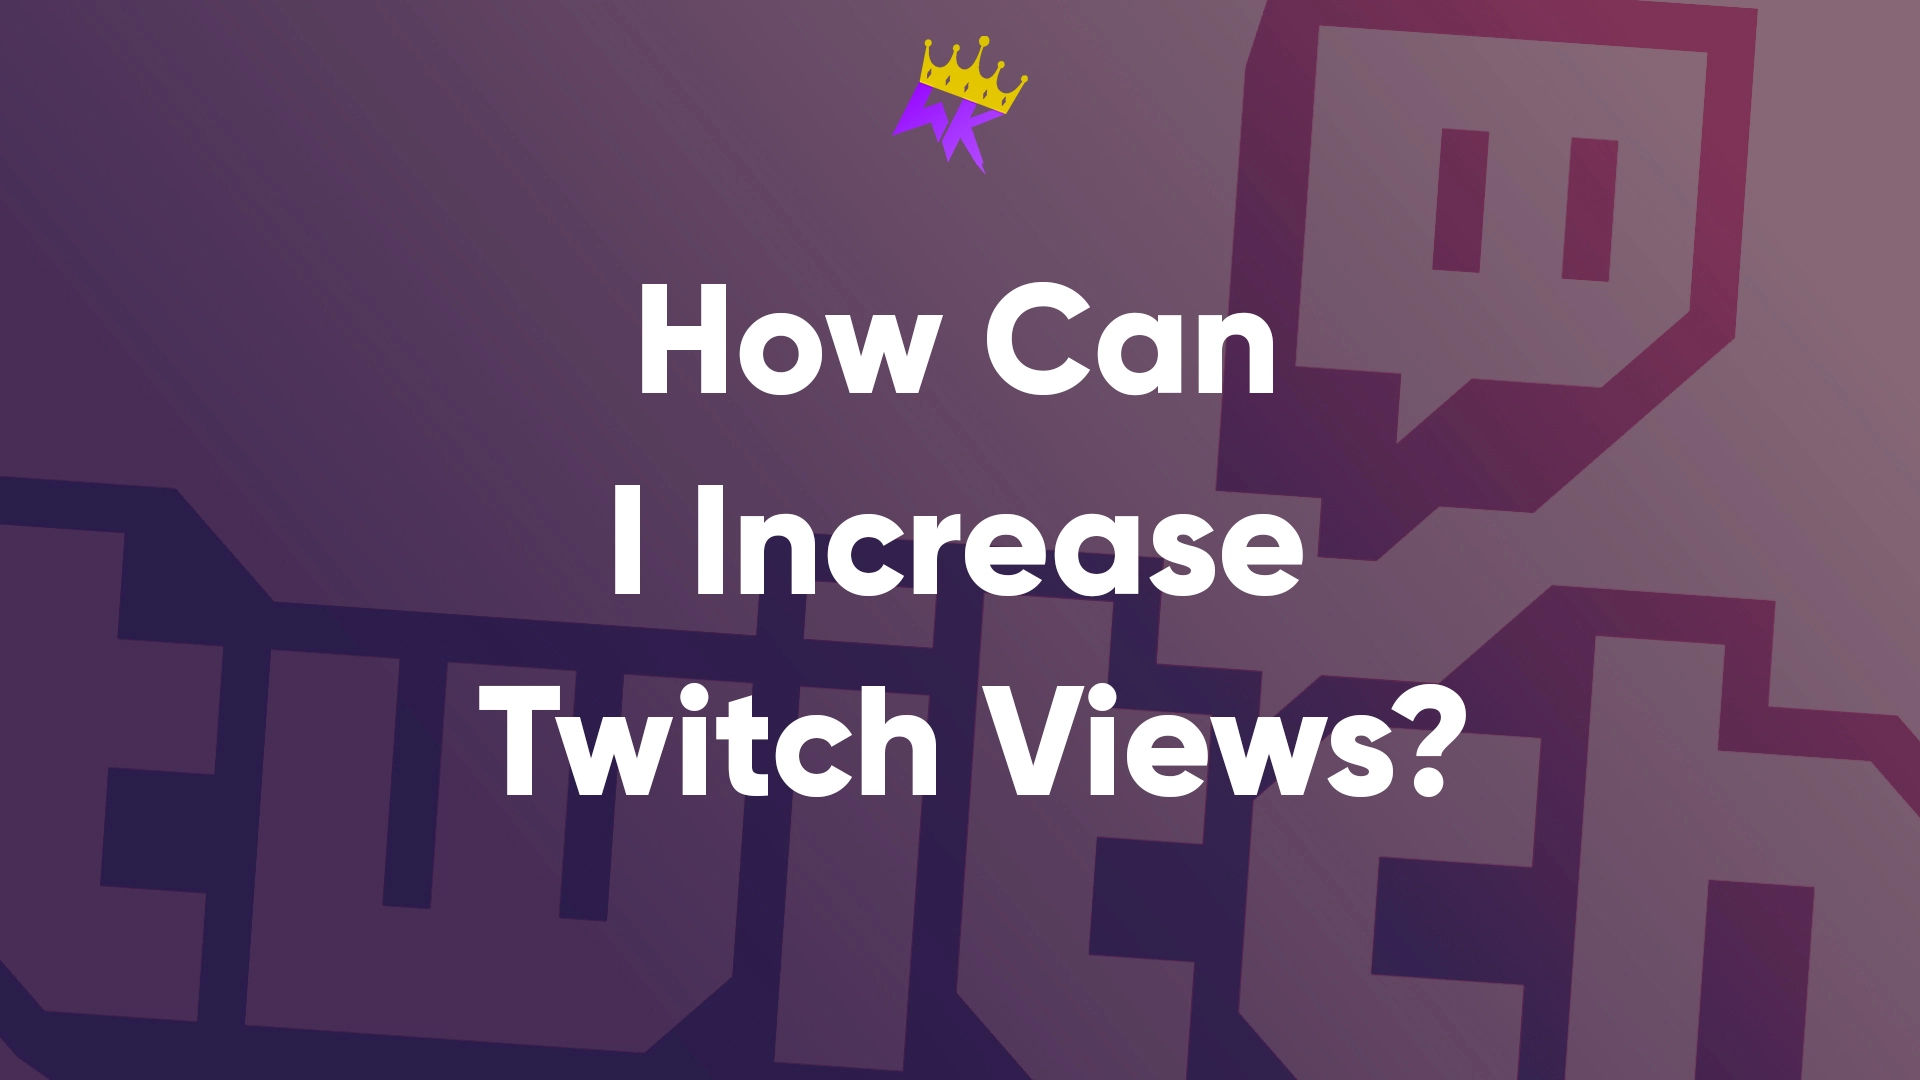 How Can I Increase Twitch Views